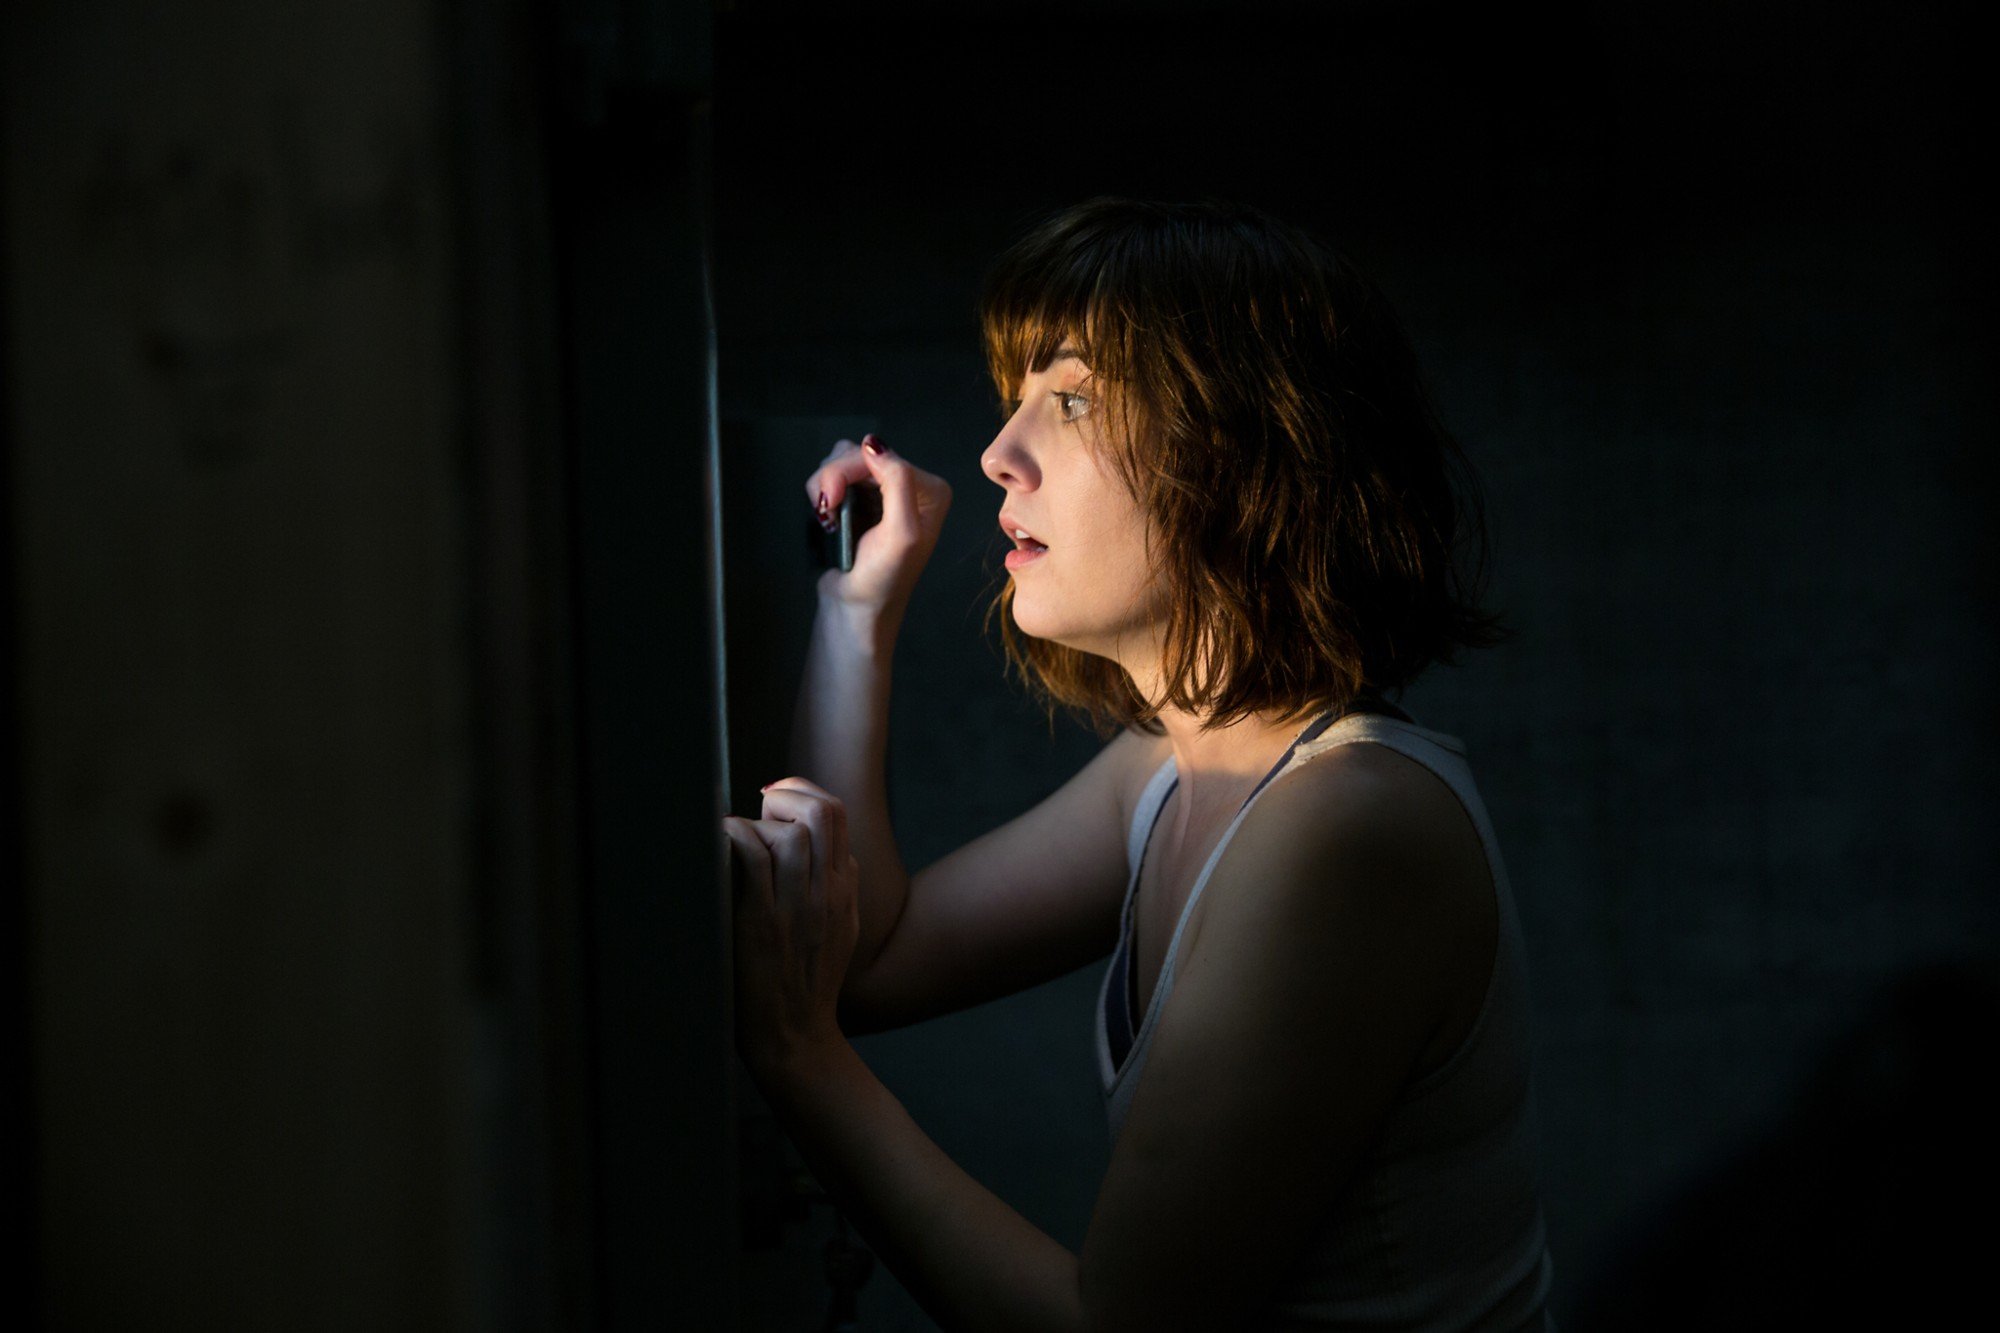 '10 Cloverfield Lane' Mary Elizabeth Winstead as Michelle standing in the dark, looking outside of a window, with a terrified look on her face.